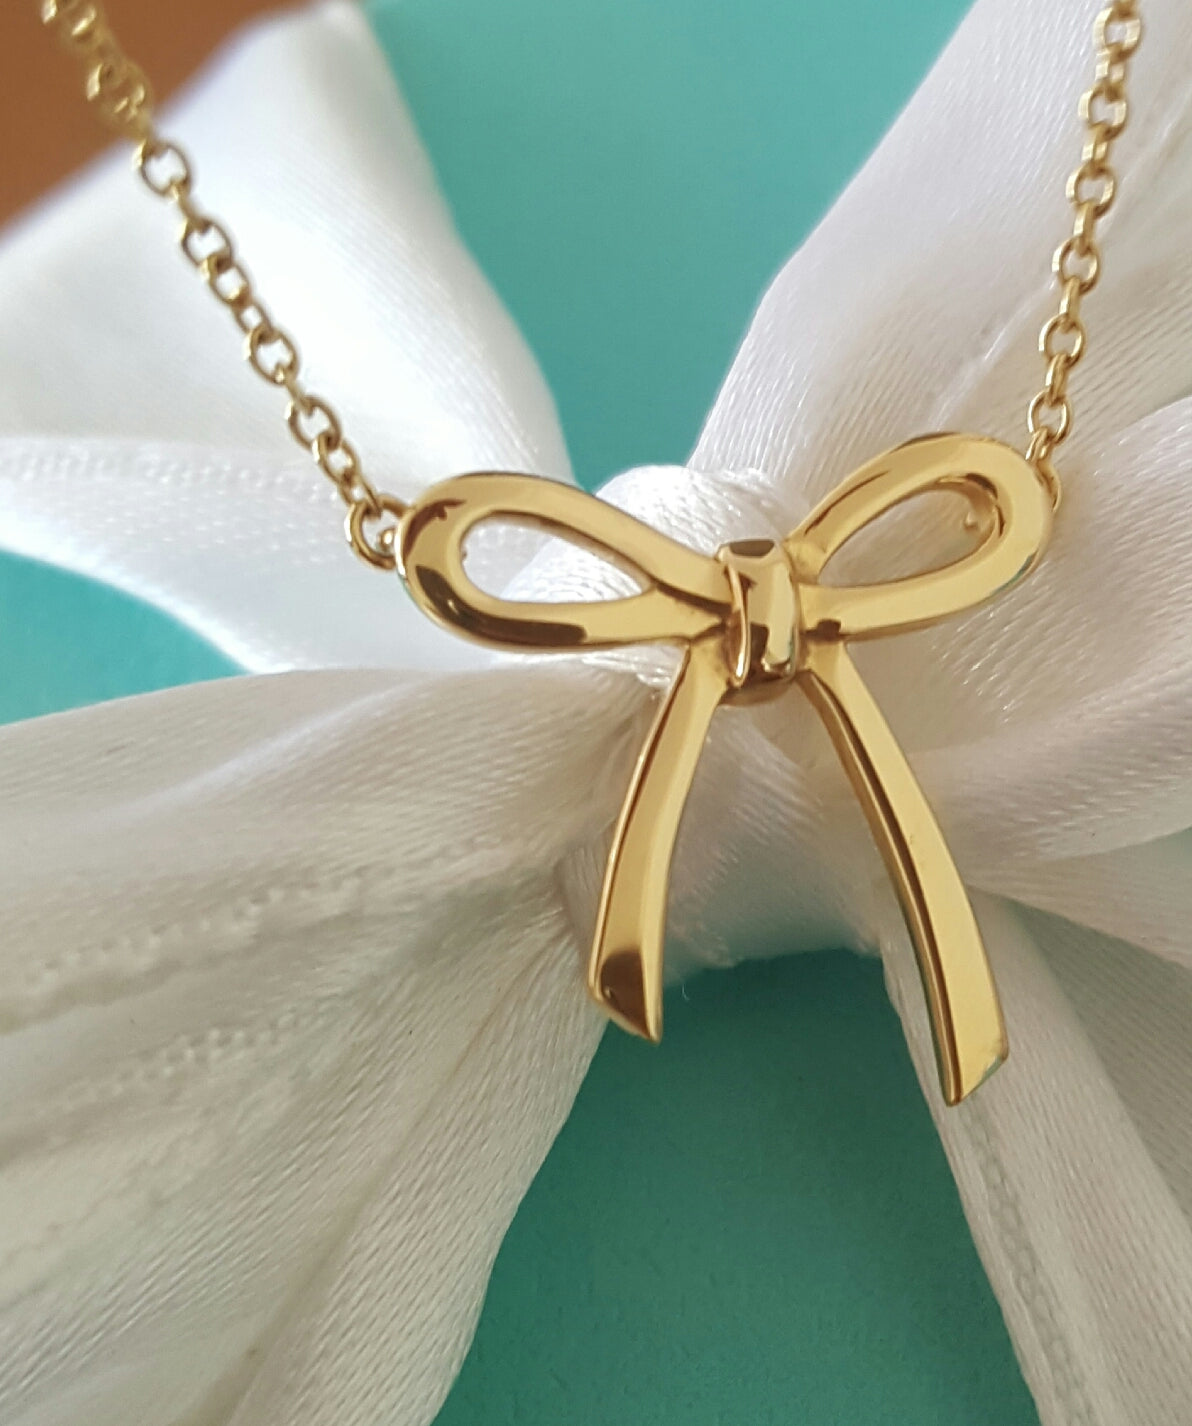 Tiffany & Co. 18ct Yellow Gold Bow Pendant Necklace 16inch Chain RRP $1600